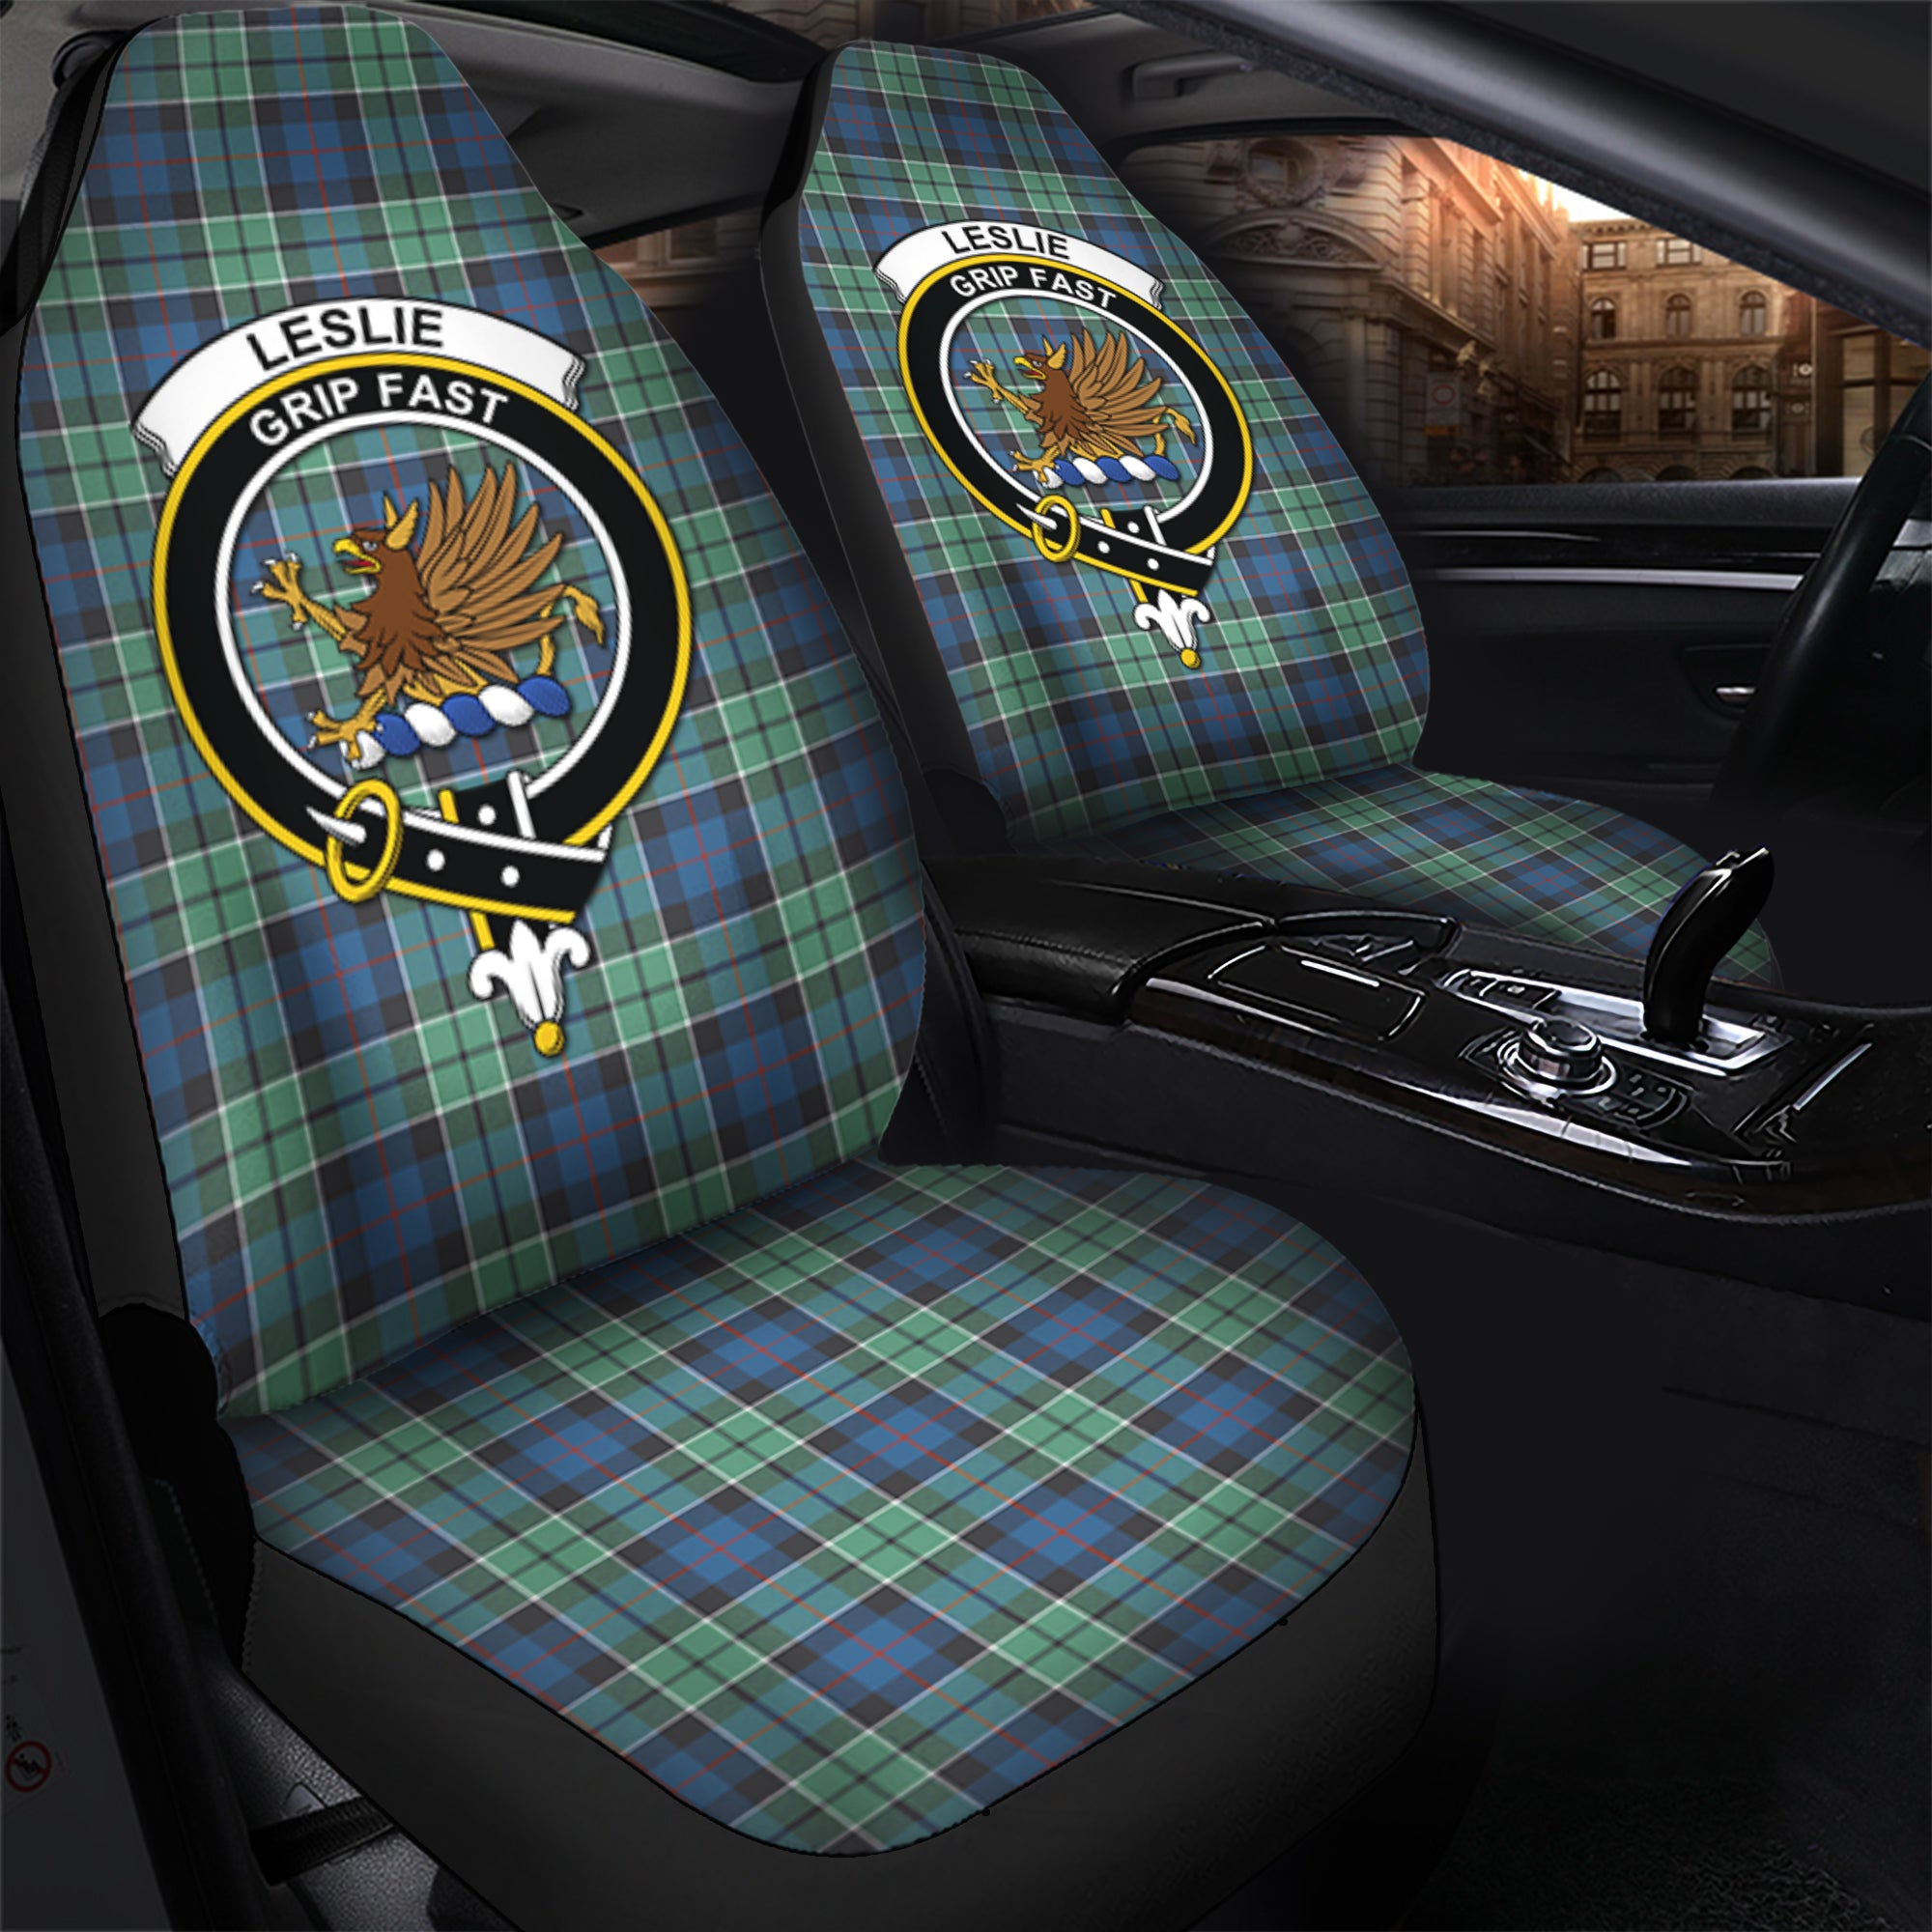 Leslie Hunting Ancient Clan Tartan Car Seat Cover, Family Crest Tartan Seat Cover TS23